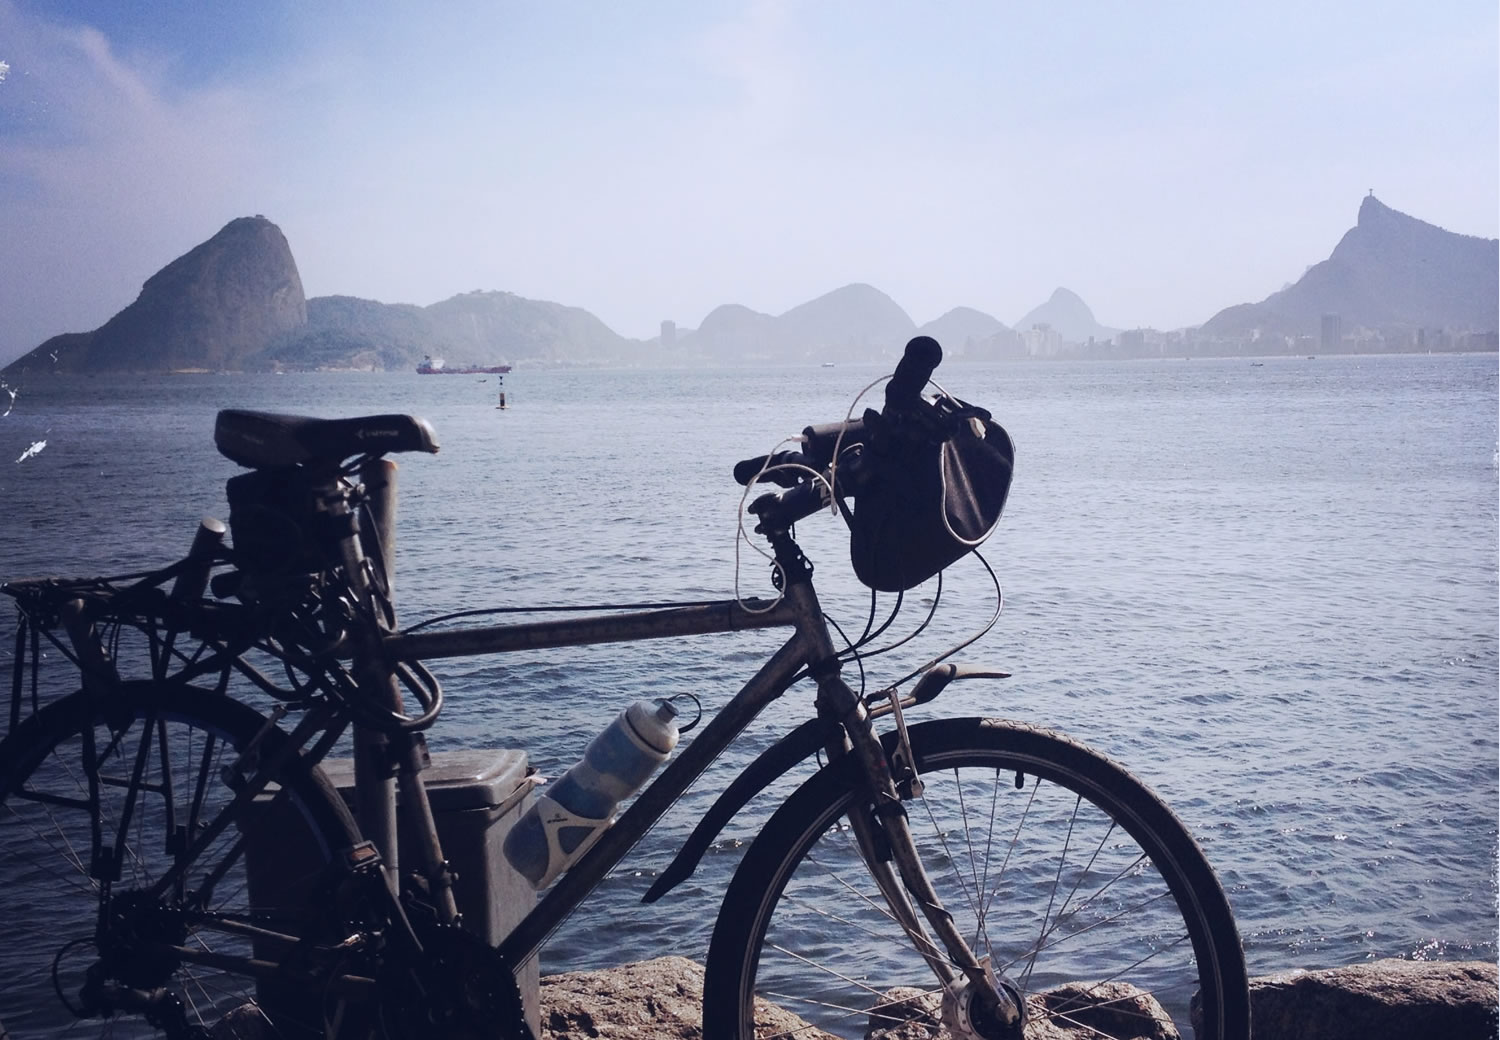 New Cycling Guide Service Helps With Rentals and Tours in Rio